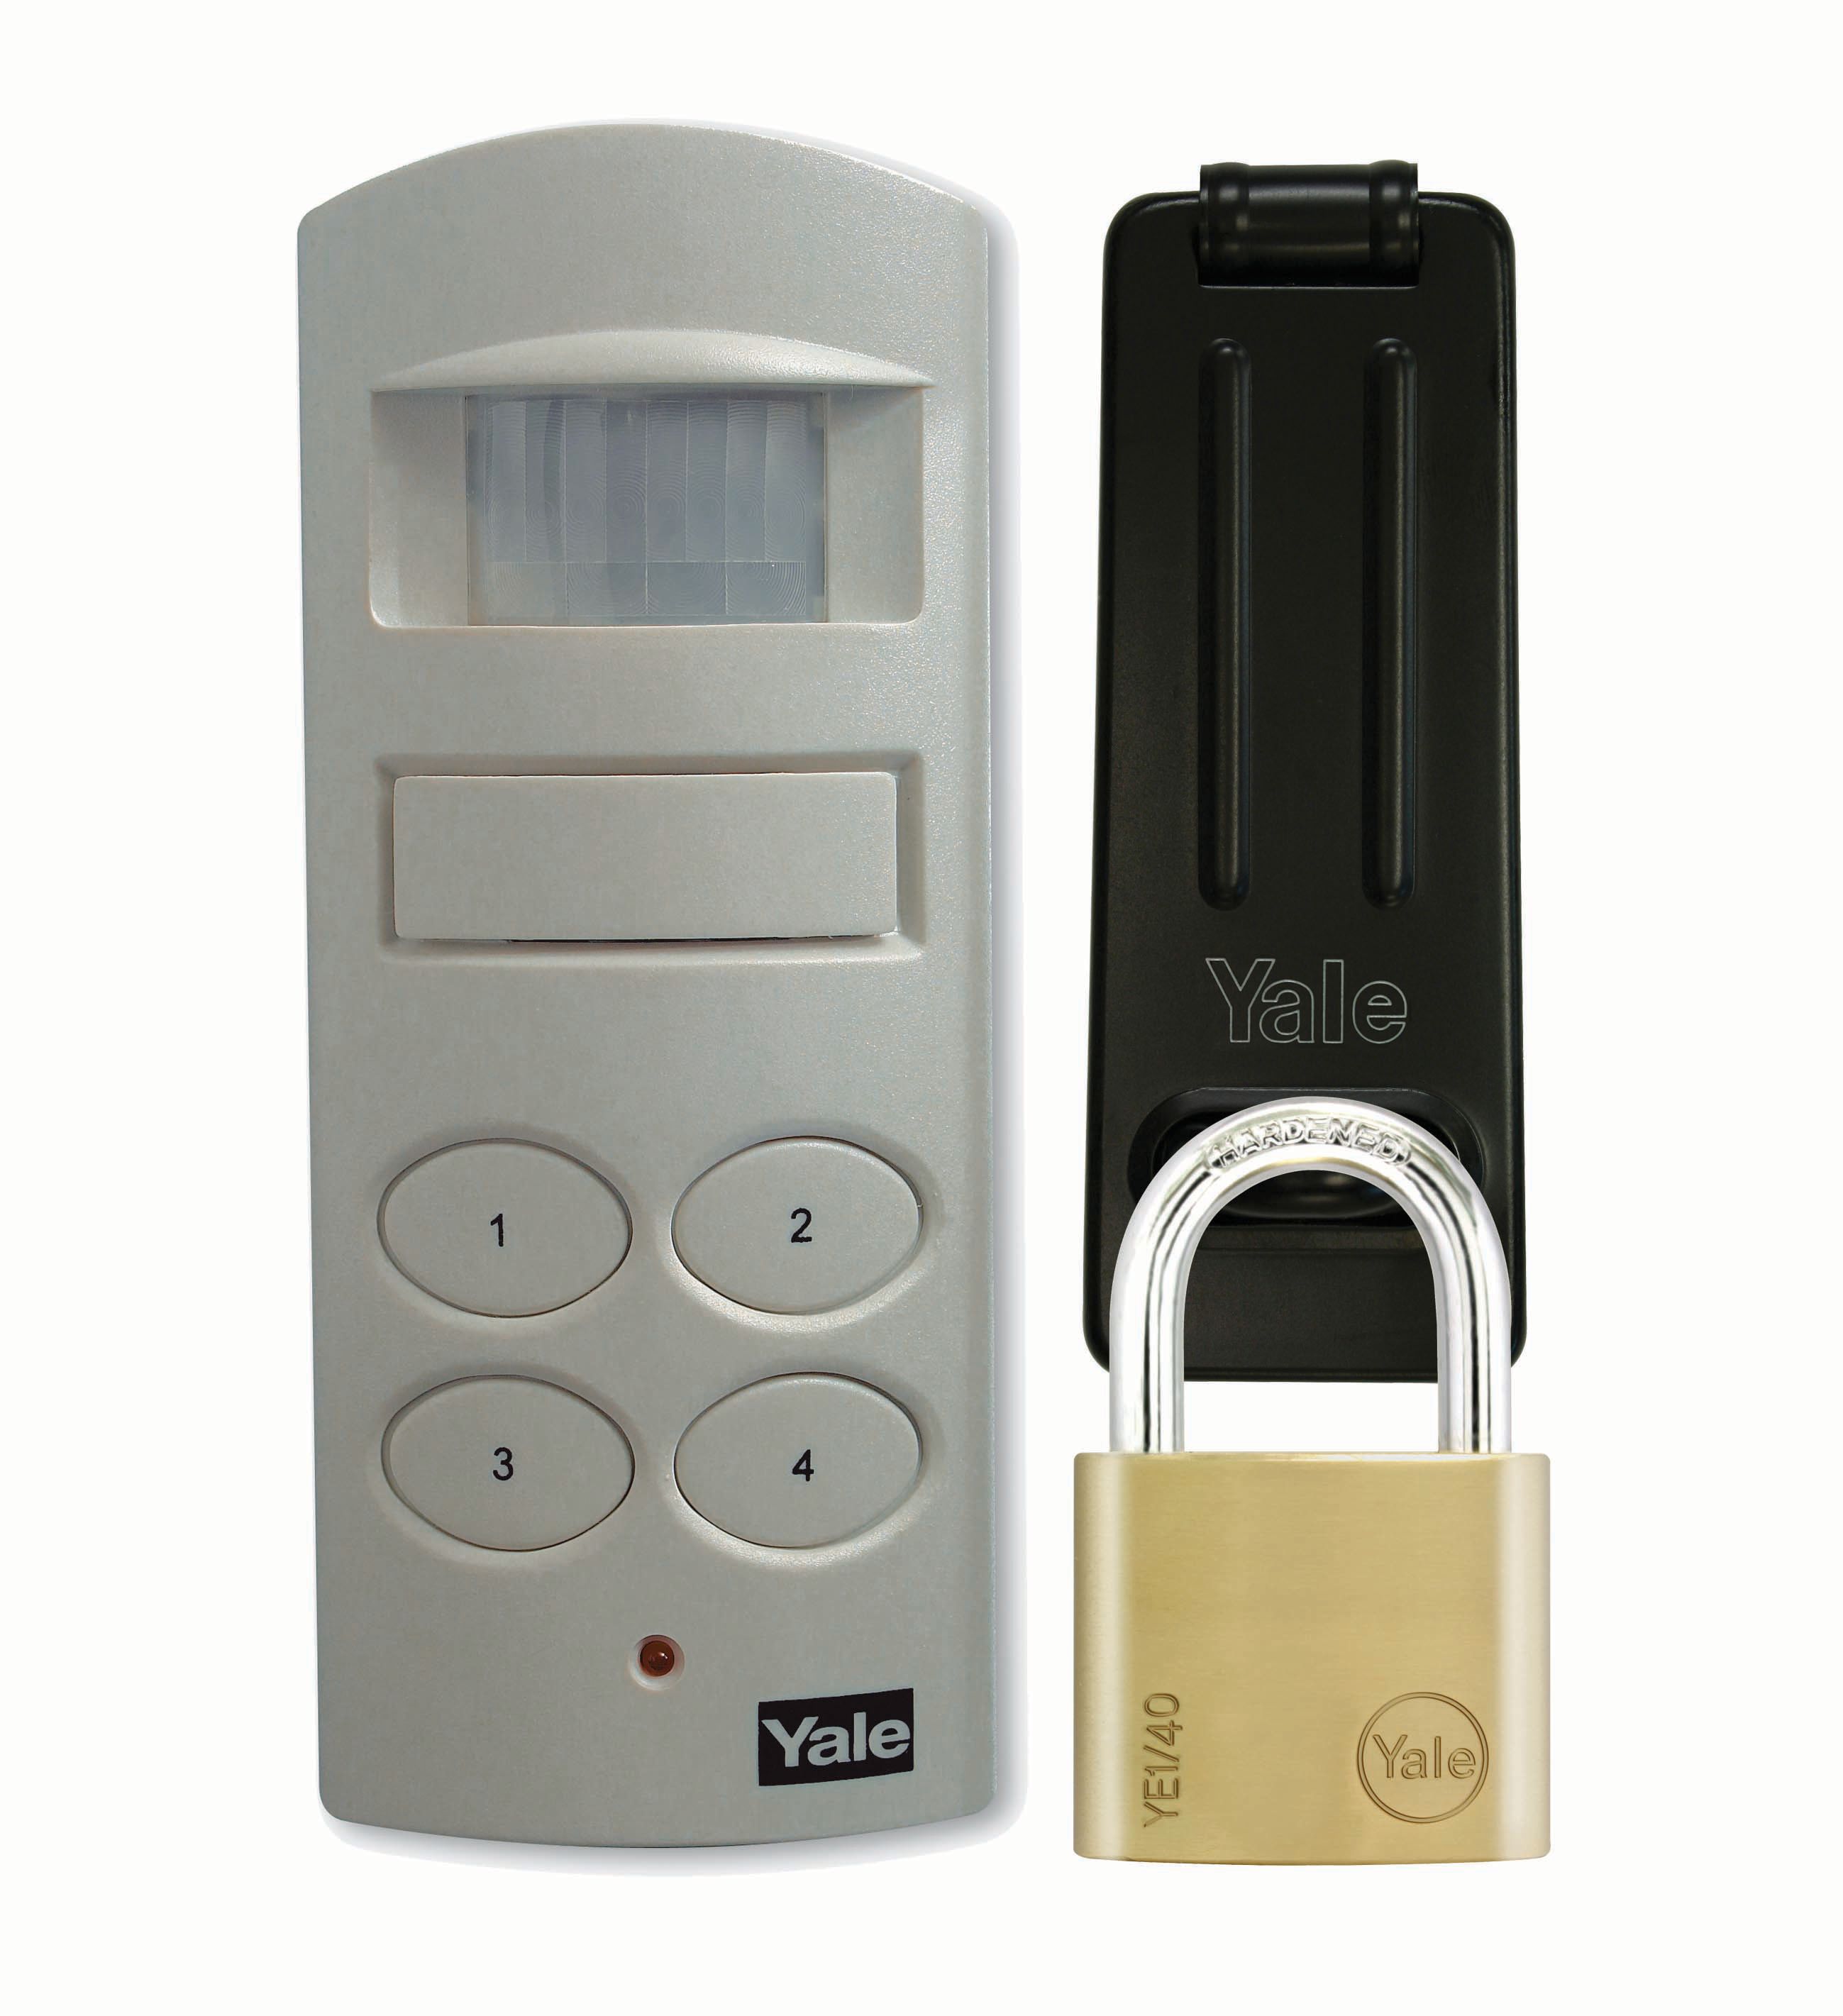 Image of Yale Home Security Shed Alarm Kit